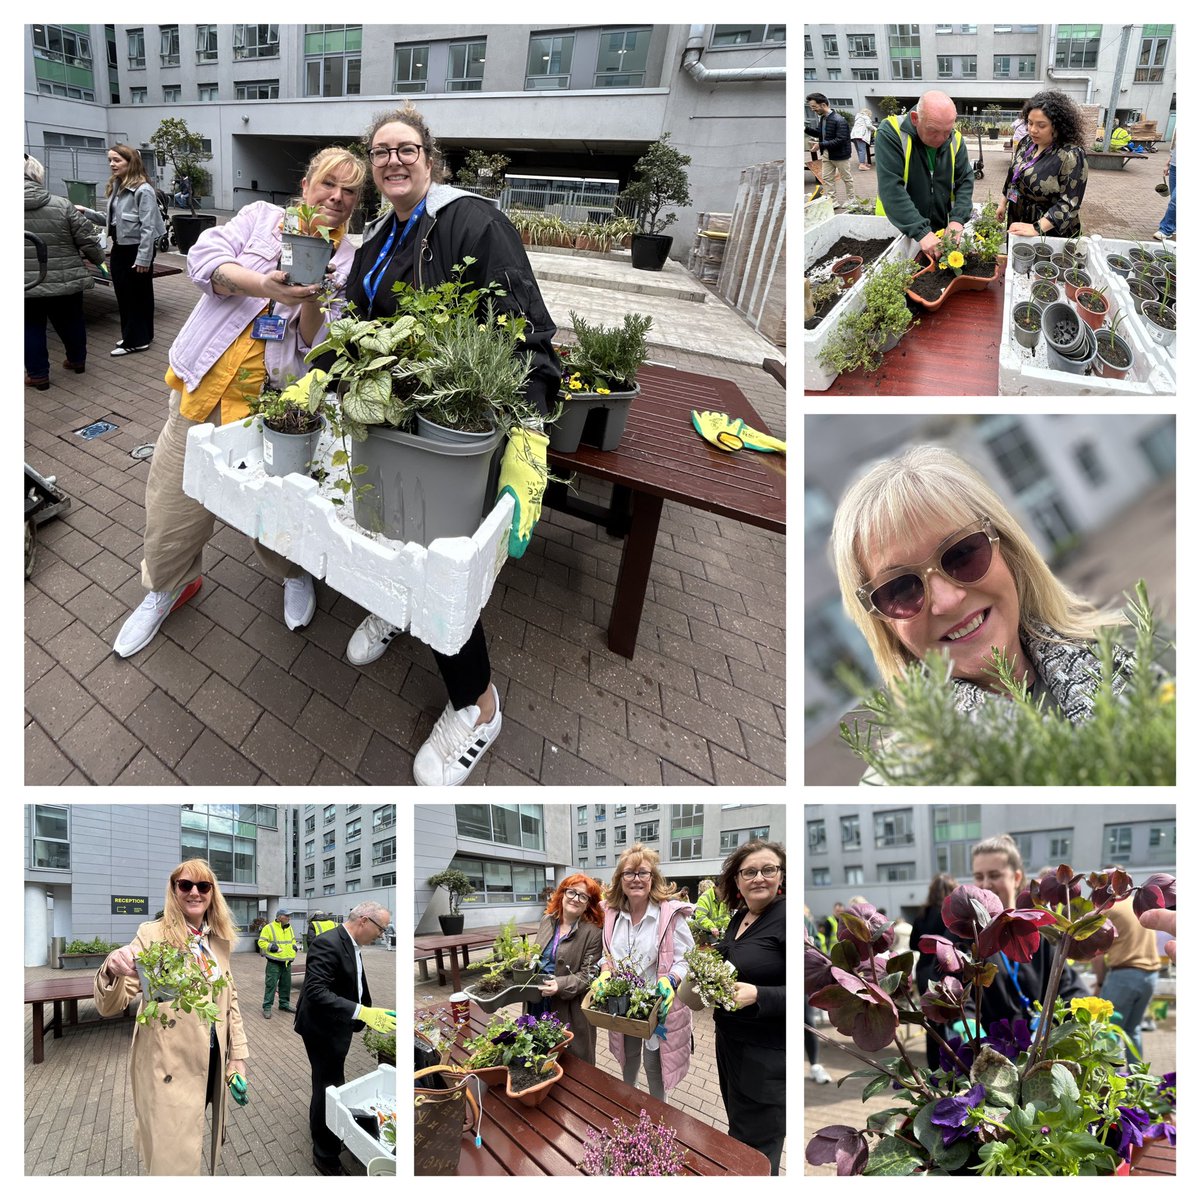 A lovely morning with @ncirl crew planting herb & flower mini gardens as part of #NCIEmployeeWellnessDay thanks to our HR team & the Green Ribbon Project part of @sunflow4u in Dublin’s North Inner City 🌻🪴🪻🌿🌼🌸😊